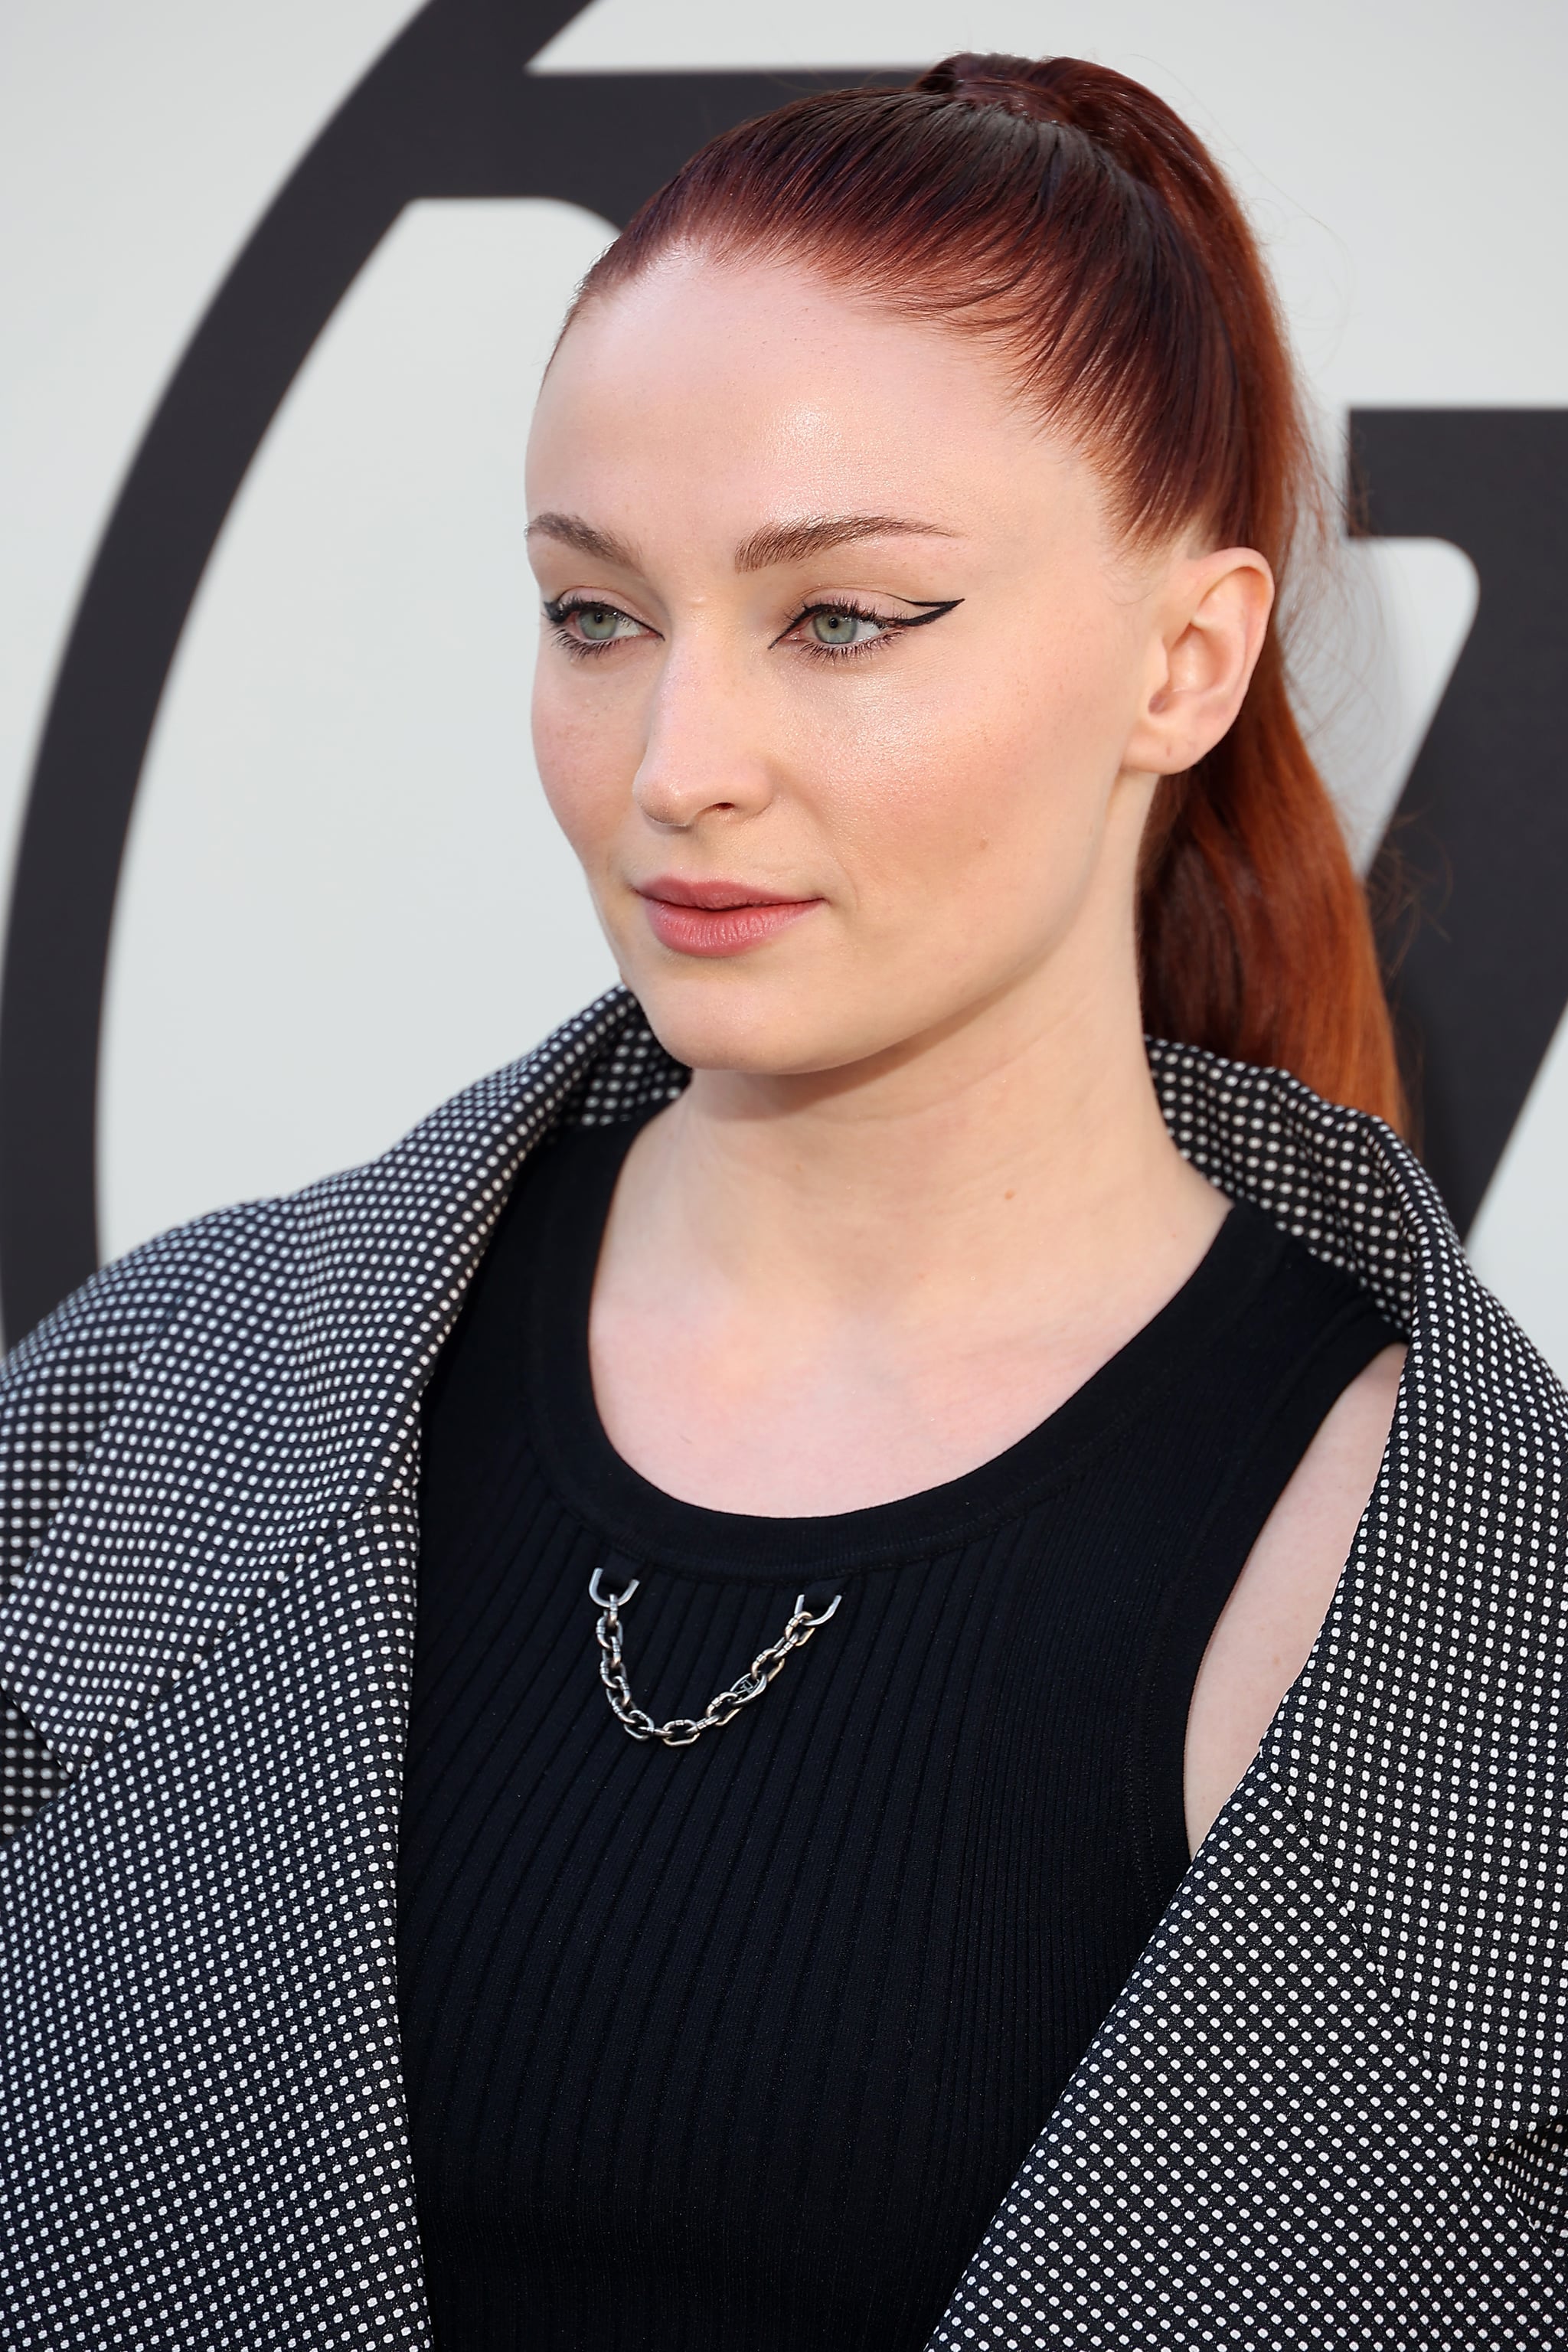 PARIS, FRANCE - OCTOBER 04: (EDITORIAL USE ONLY - For Non-Editorial use please seek approval from Fashion House) Sophie Turner attends the Louis Vuitton Womenswear Spring/Summer 2023 show as part of Paris Fashion Week  on October 04, 2022 in Paris, France. (Photo by Marc Piasecki/WireImage)